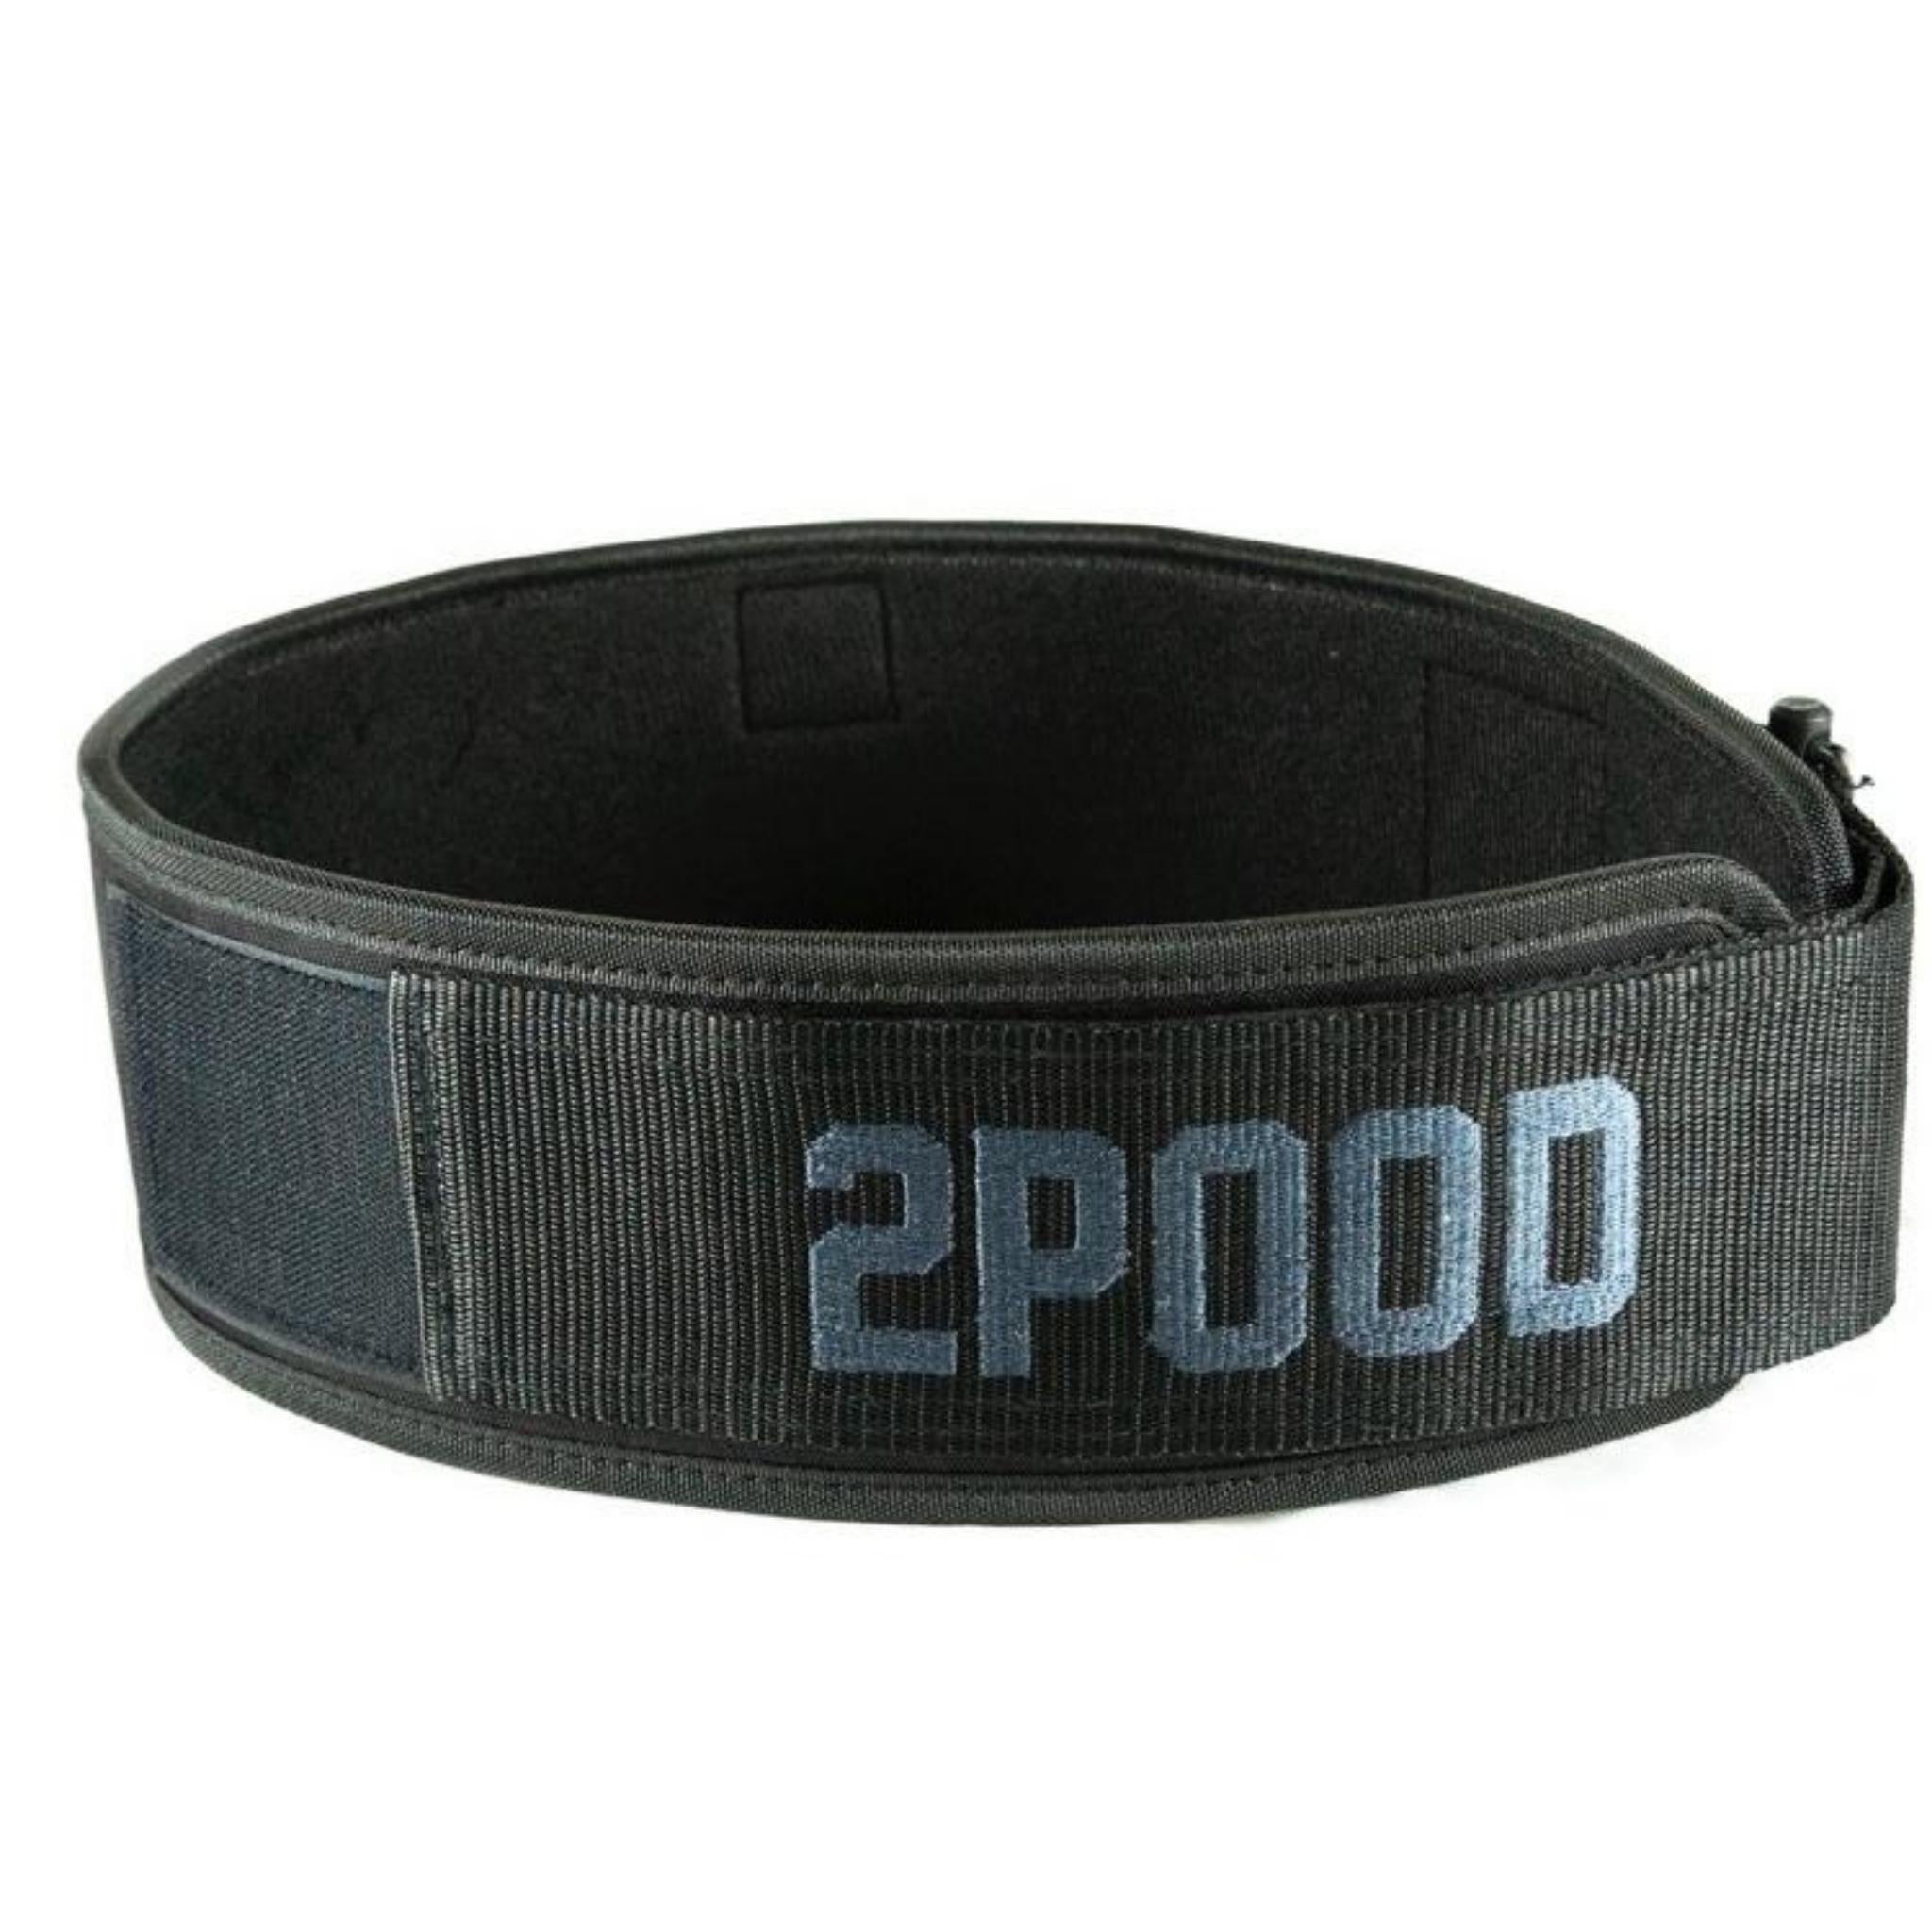 Operator Straight Belt from 2POOD for Genejack WOD